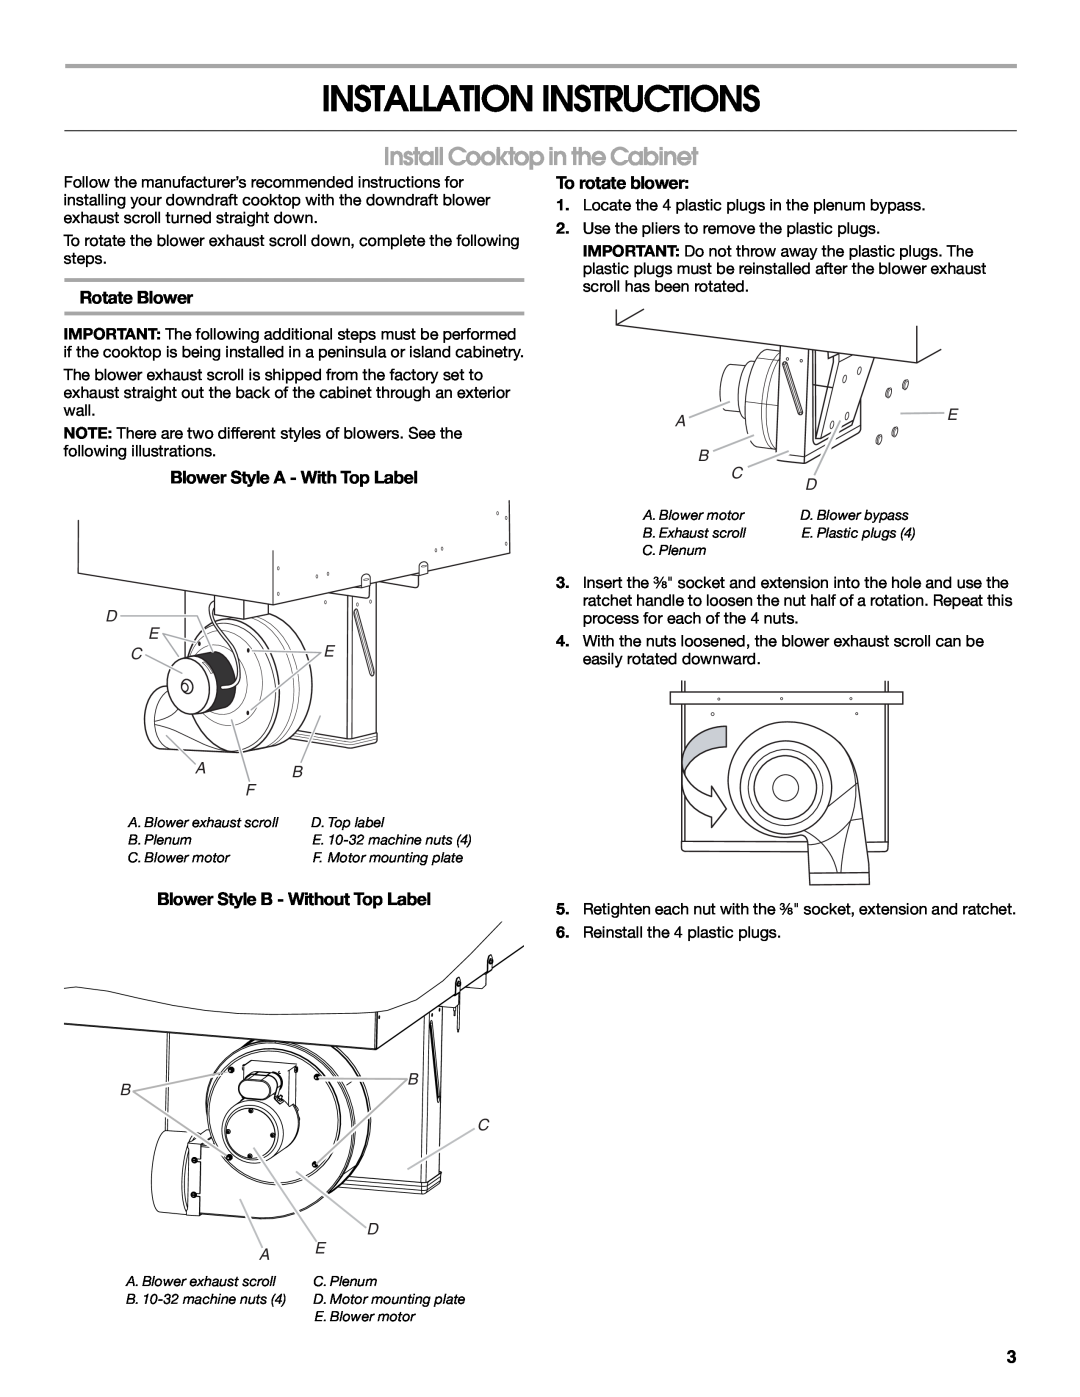 Jenn-Air W10439669A Installation Instructions, Install Cooktop in the Cabinet, Rotate Blower, To rotate blower, Ab F 